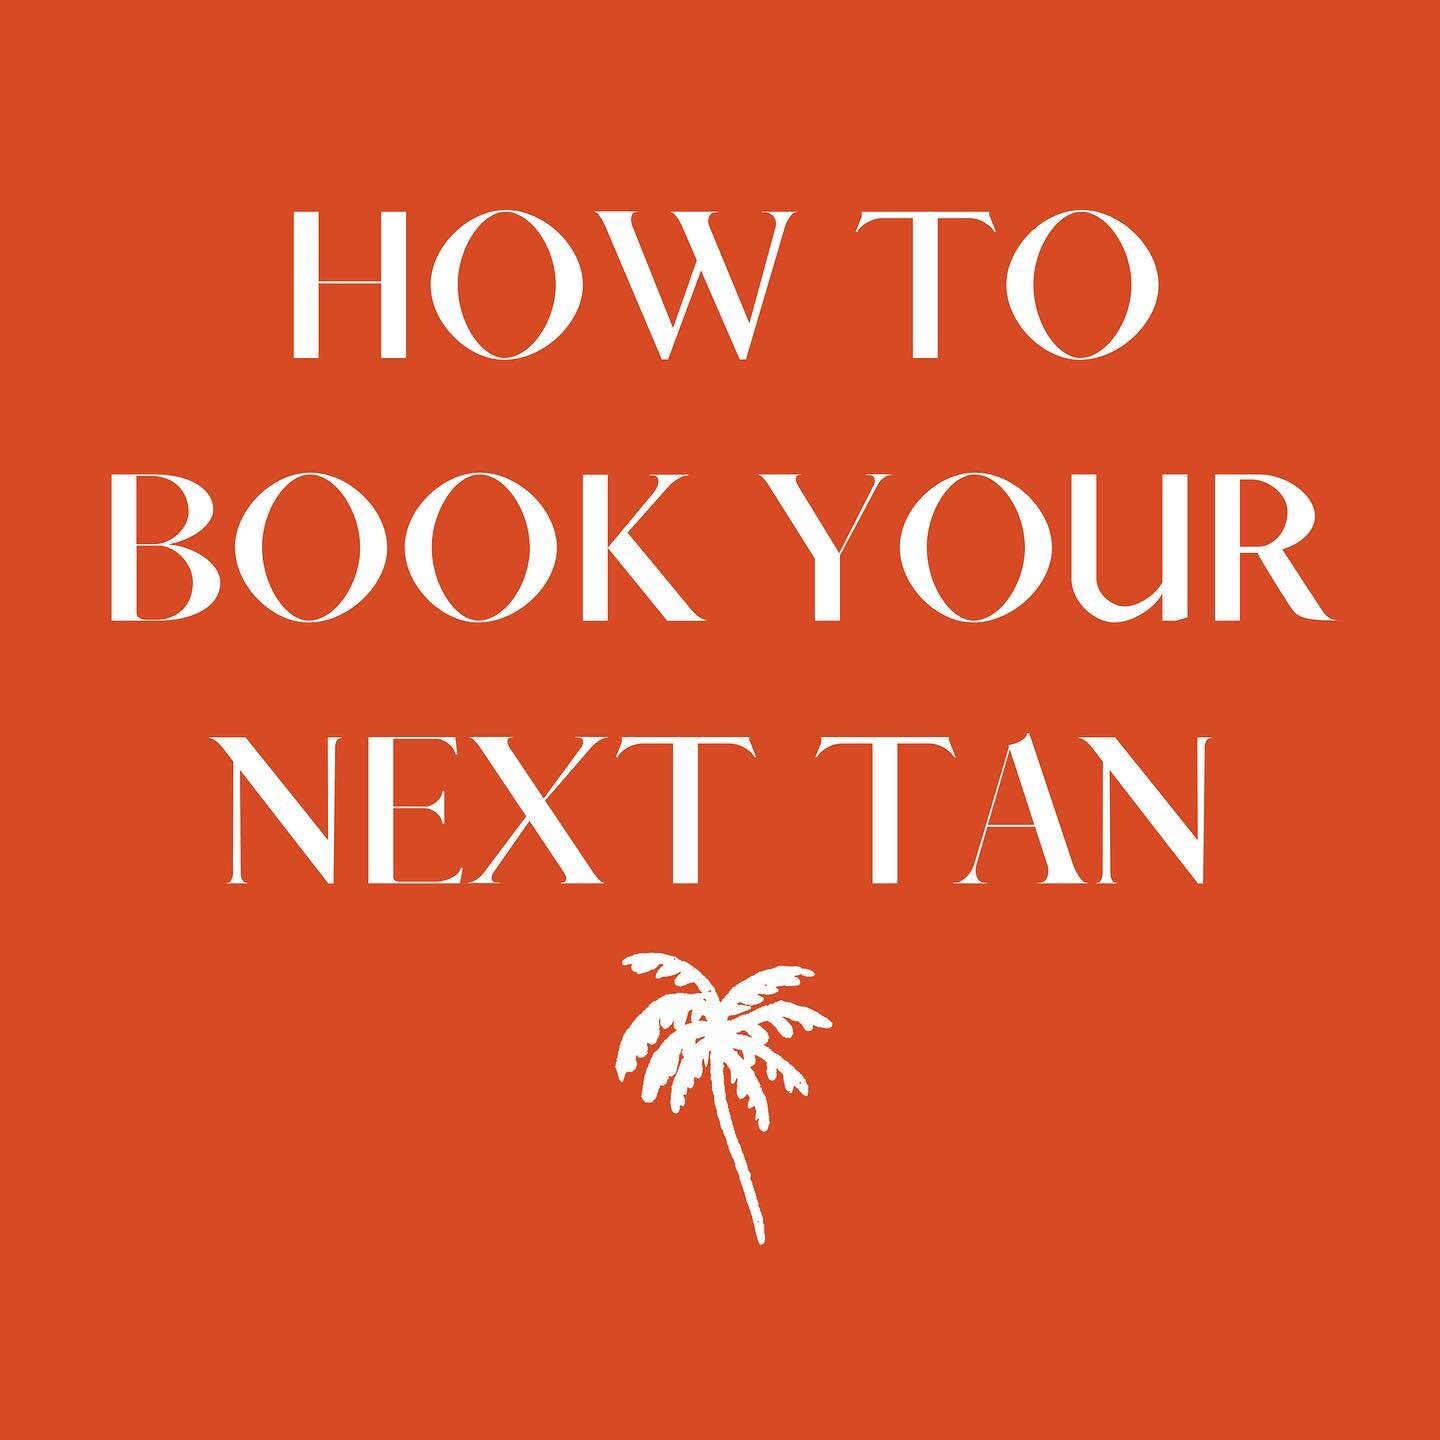 Step 1 - Download the Casa Soleil app

Step 2 - Join club 

Step 3 - Choose your membership type (recurring or casual) 

Step 4 - Hit &ldquo;Tan Now&rdquo; 

Step 5 - Select your booking time and confirm